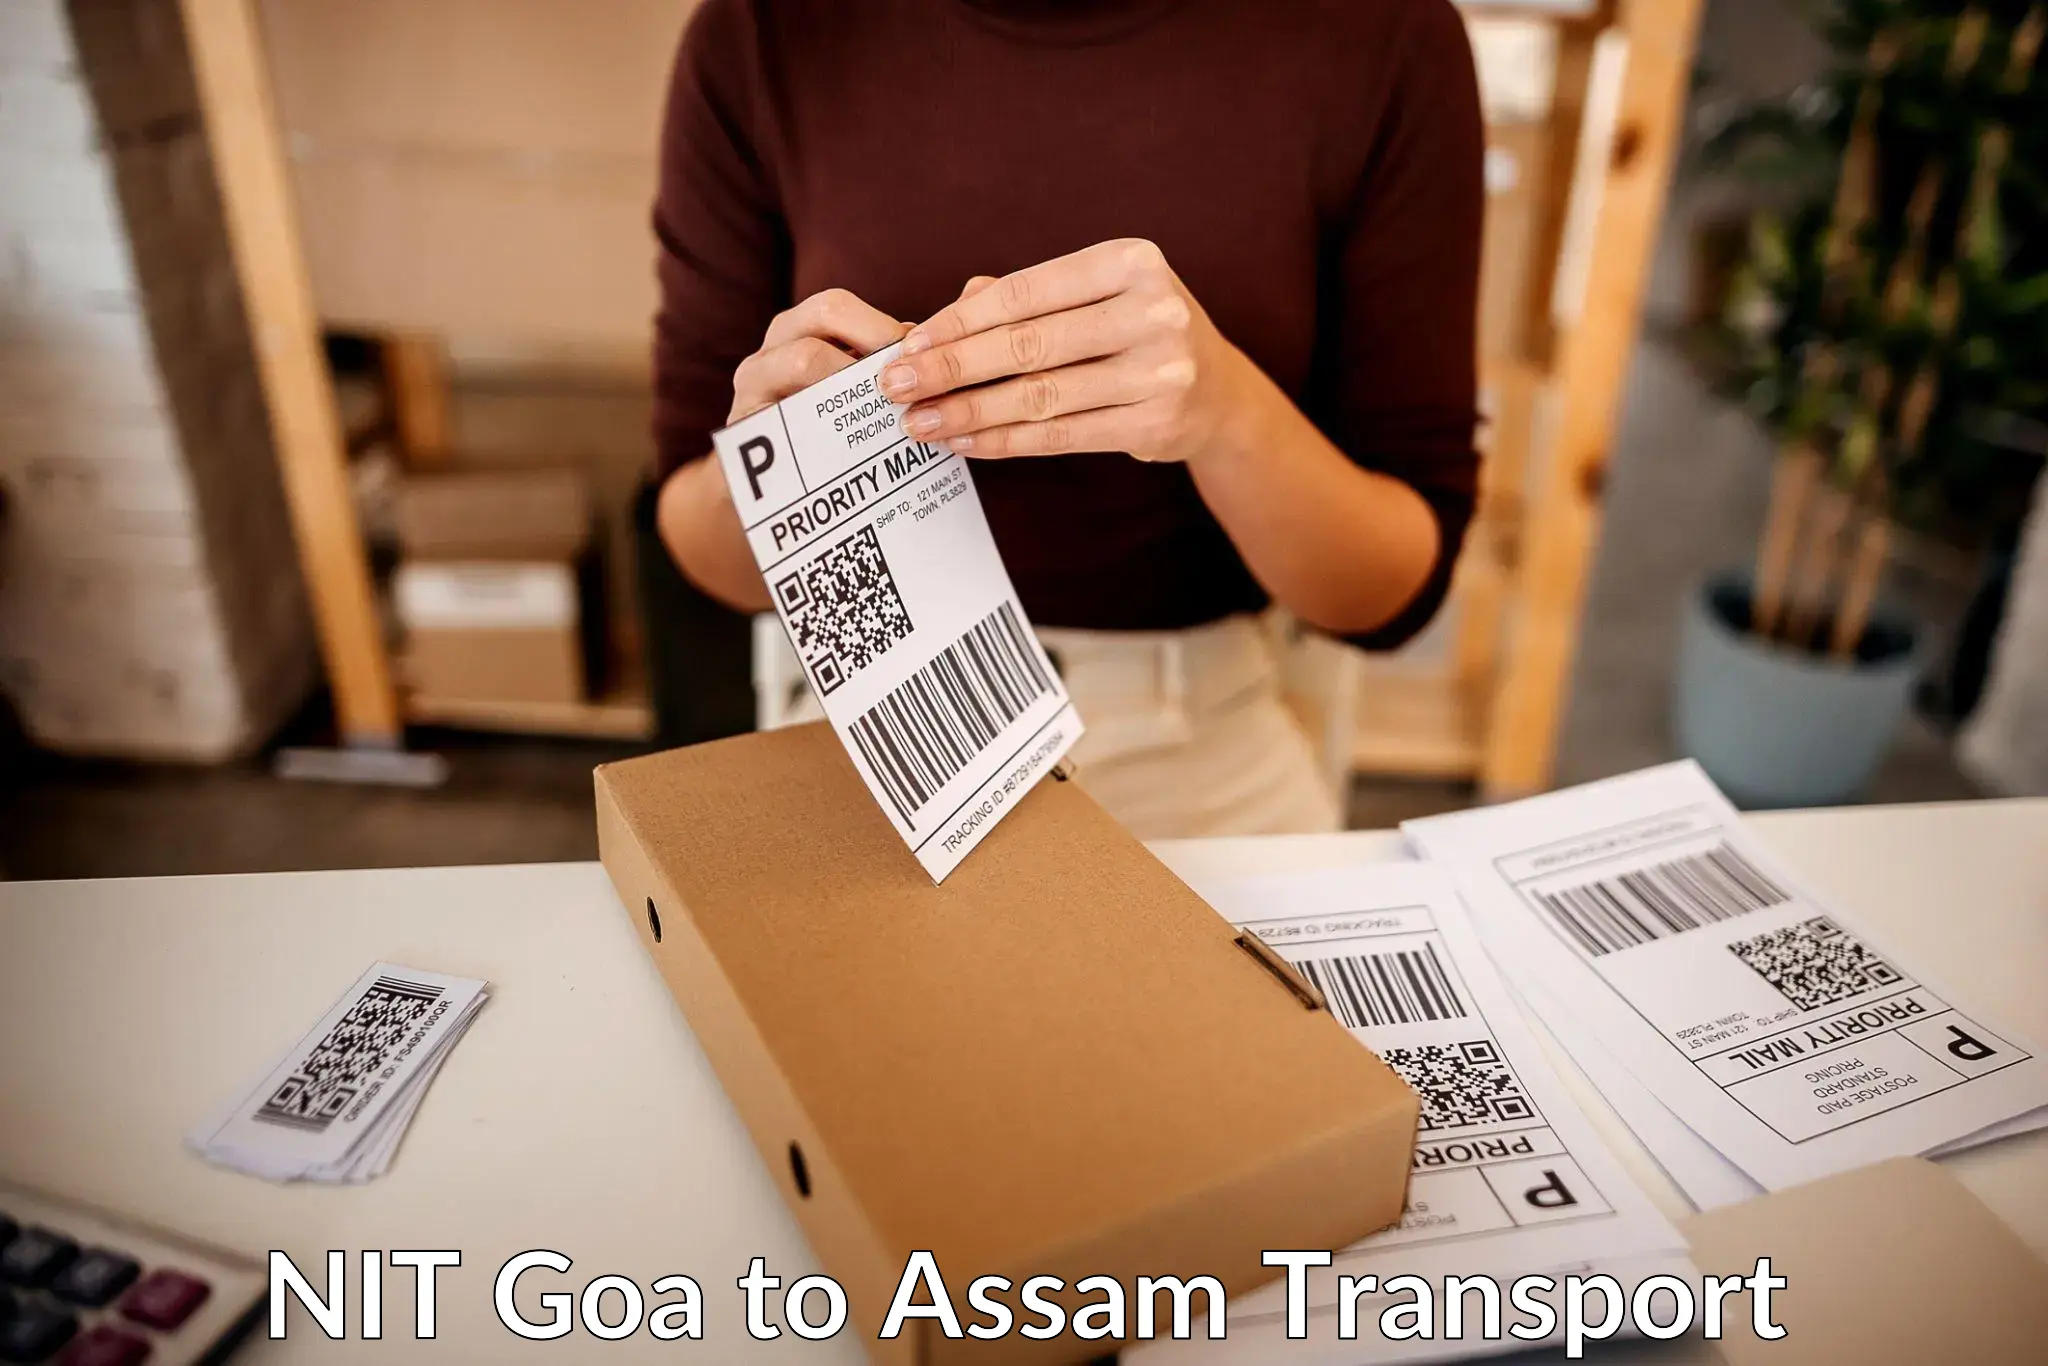 Delivery service NIT Goa to Assam